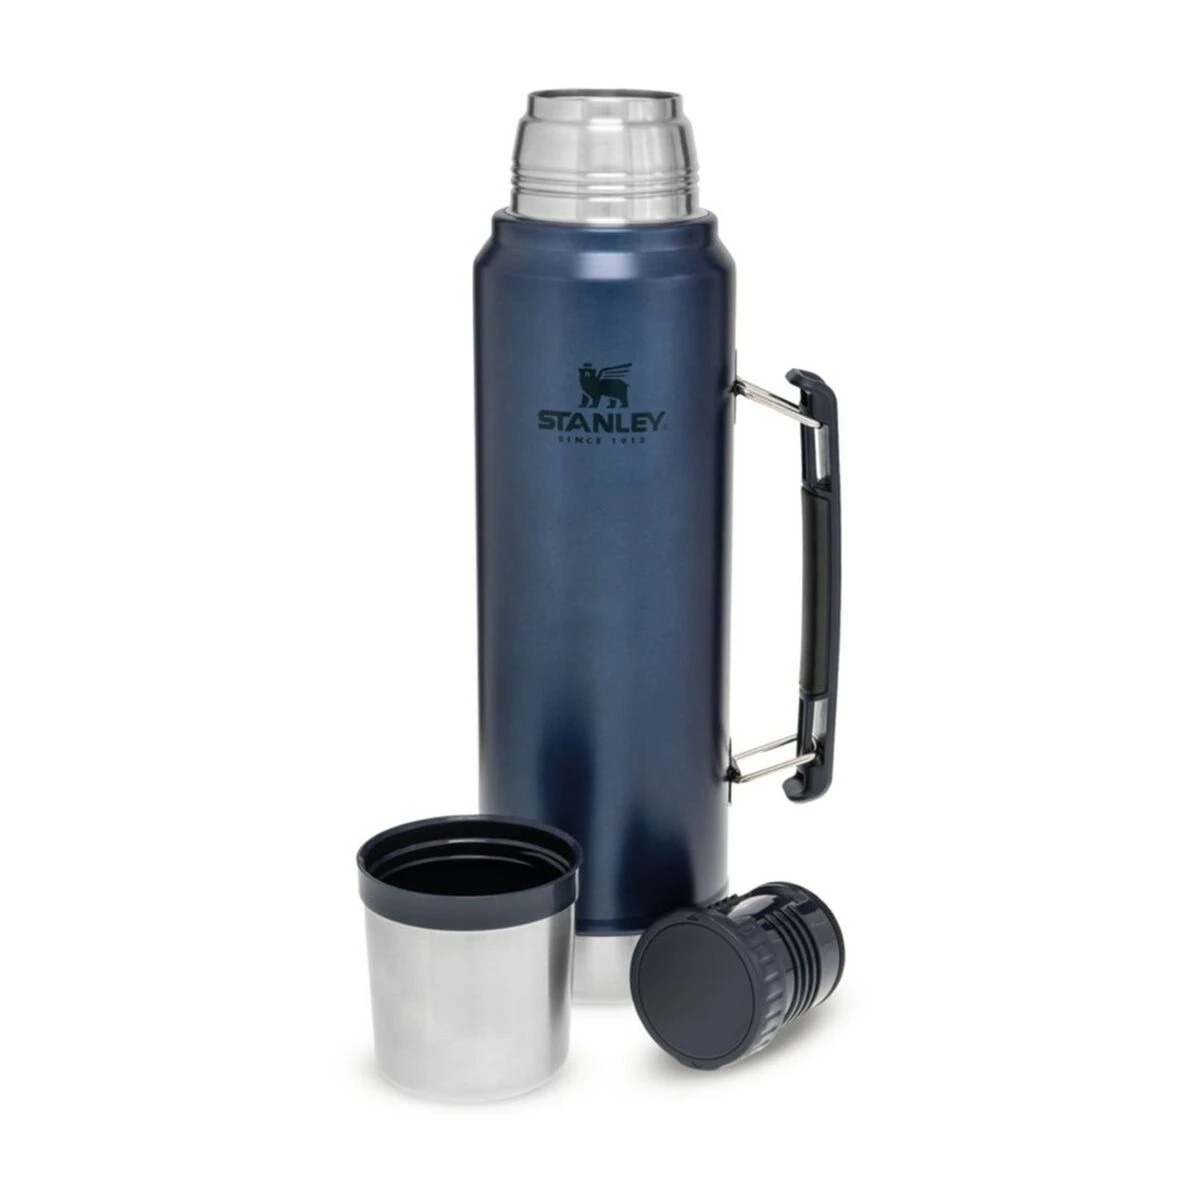 Blue Stanley thermos with cup and lid